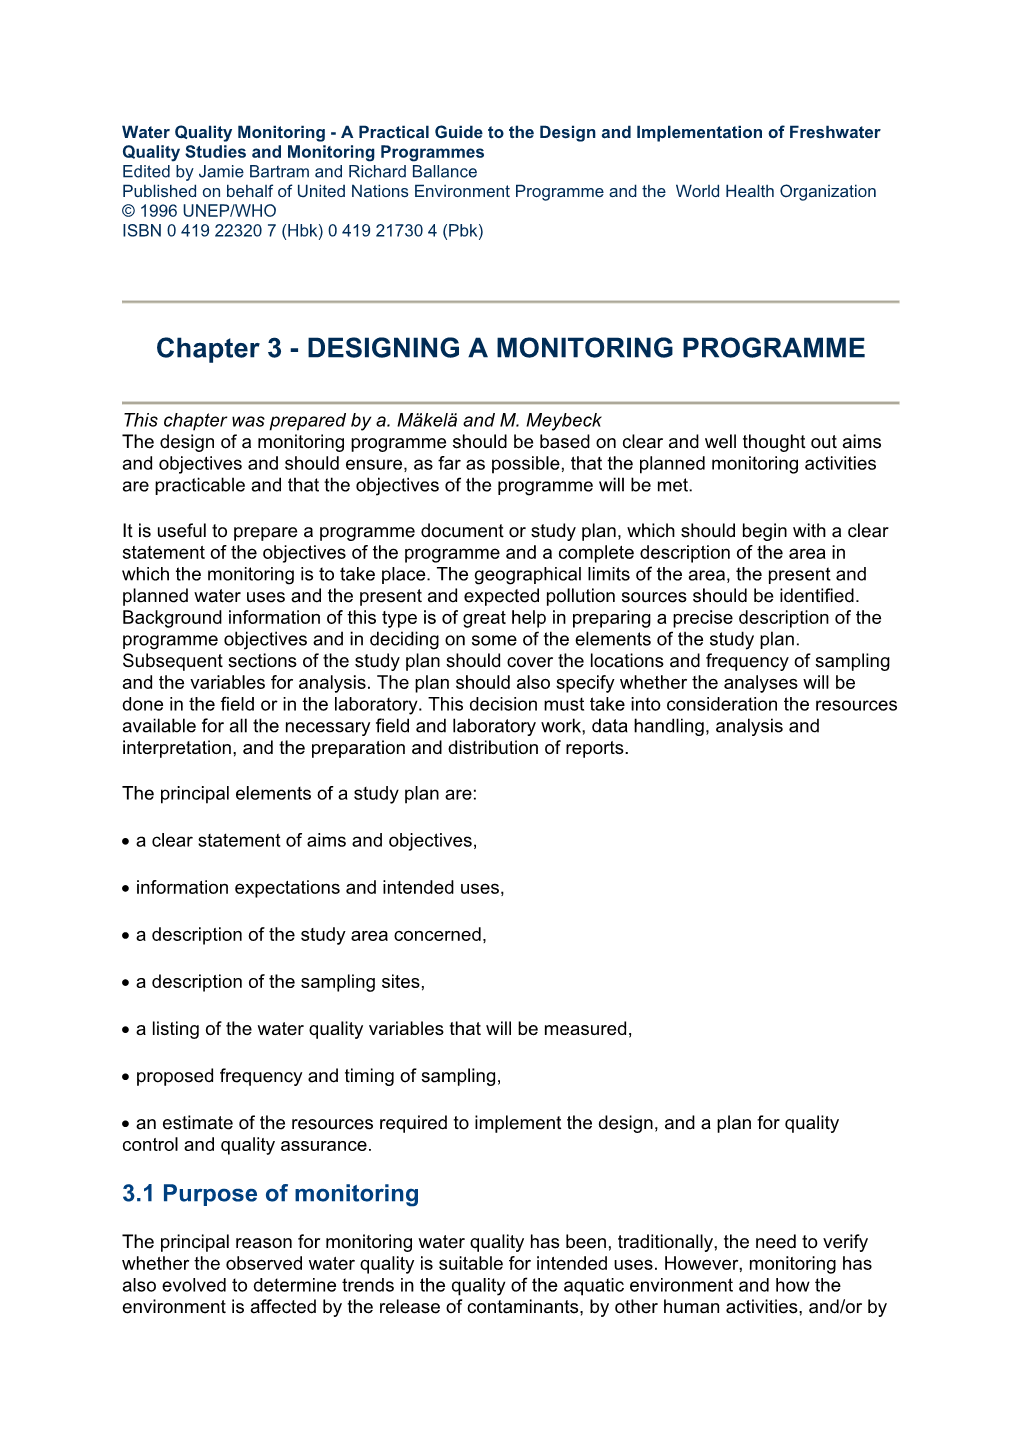 Chapter 3 - DESIGNING a MONITORING PROGRAMME